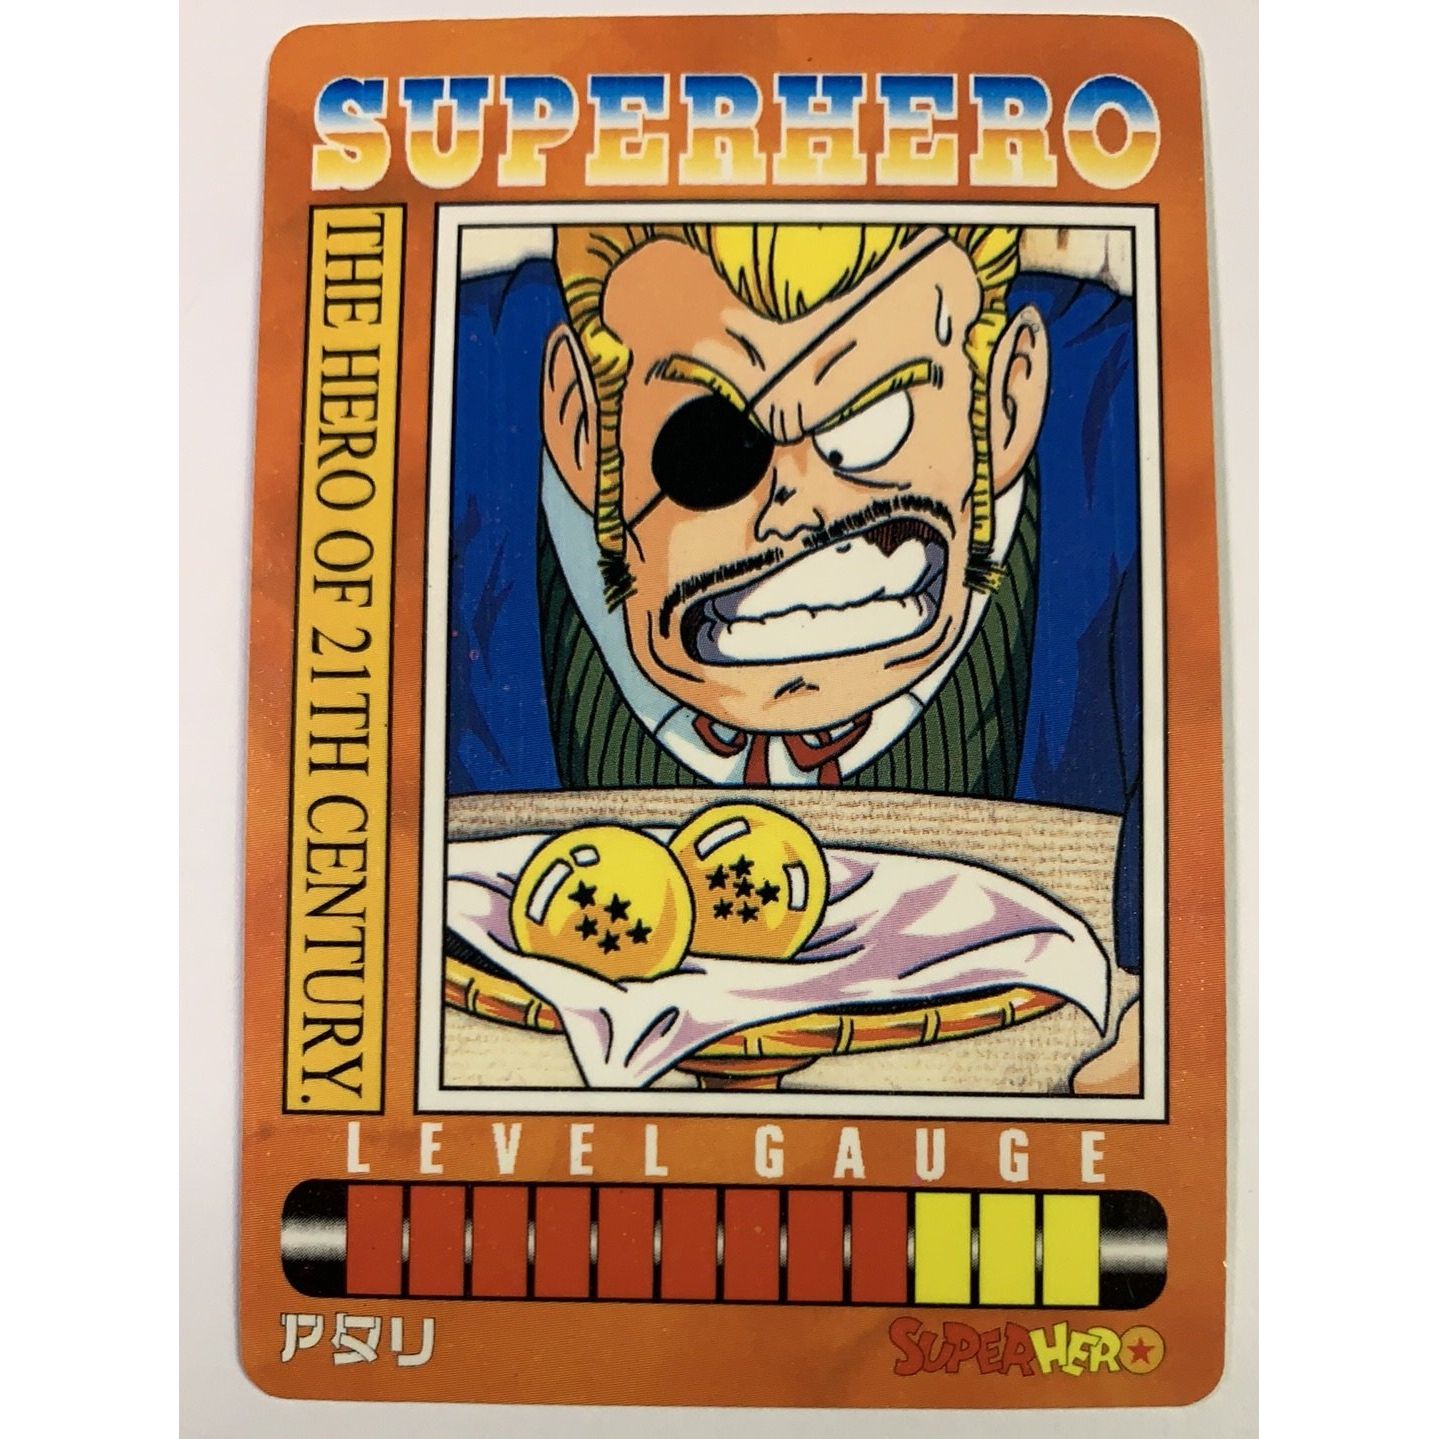  1995 Cardass Adali Dragon Ball Z Super Hero Special Card S-123 Silver Foil  Local Legends Cards & Collectibles